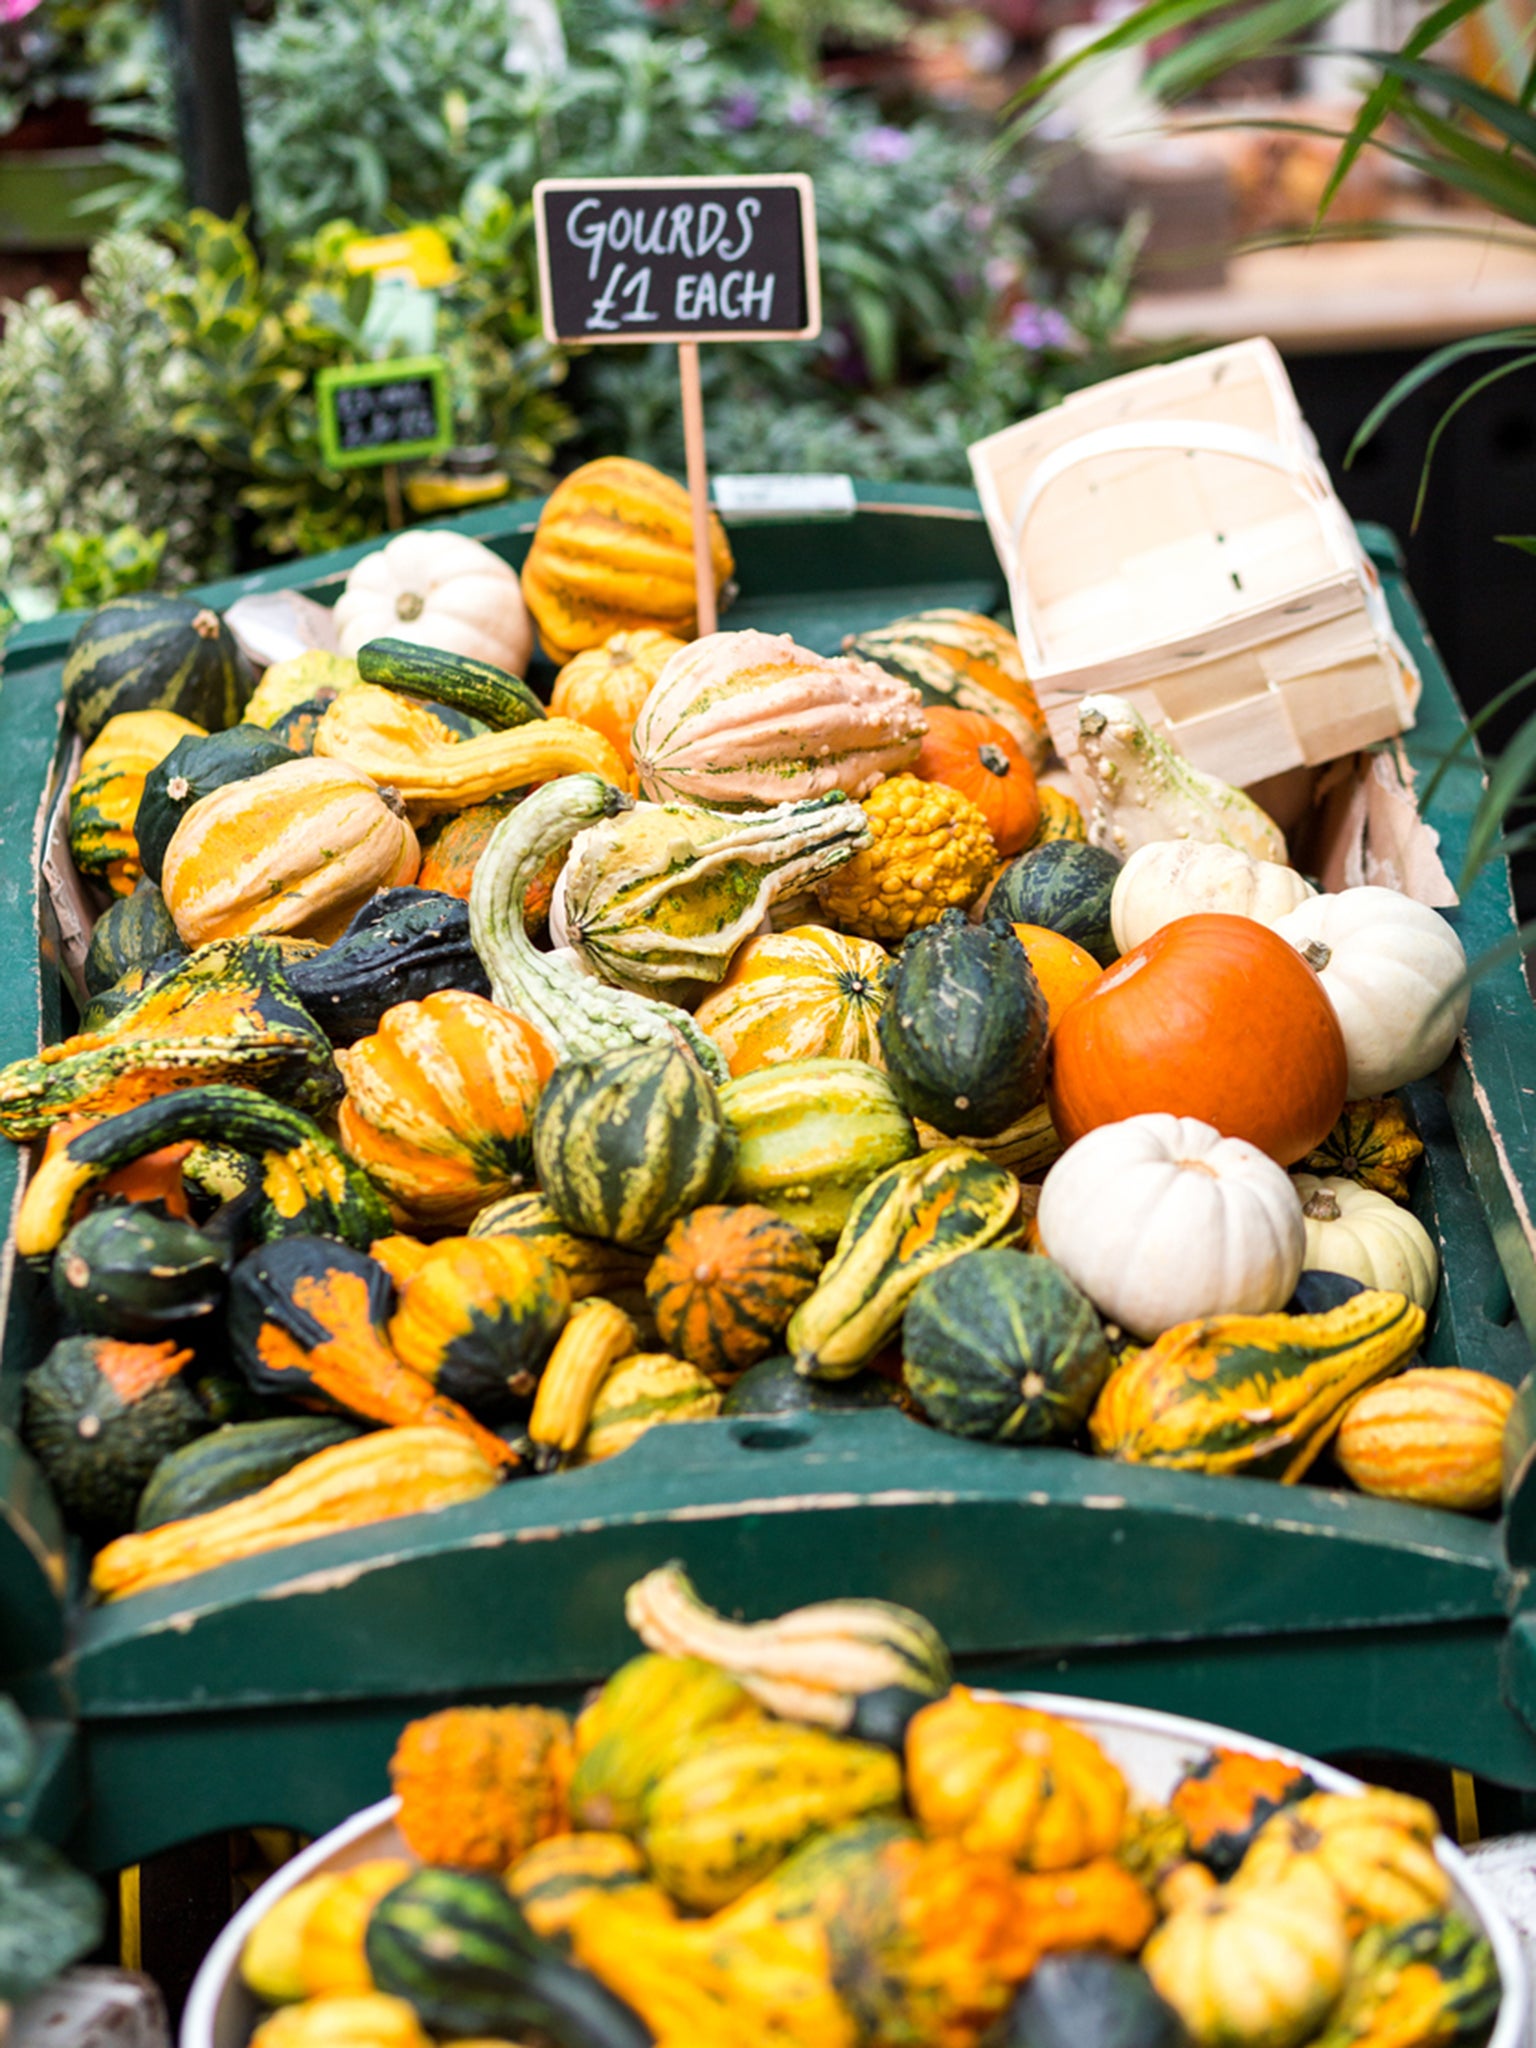 The comedic sight of squashes piled high is typical at this time of year